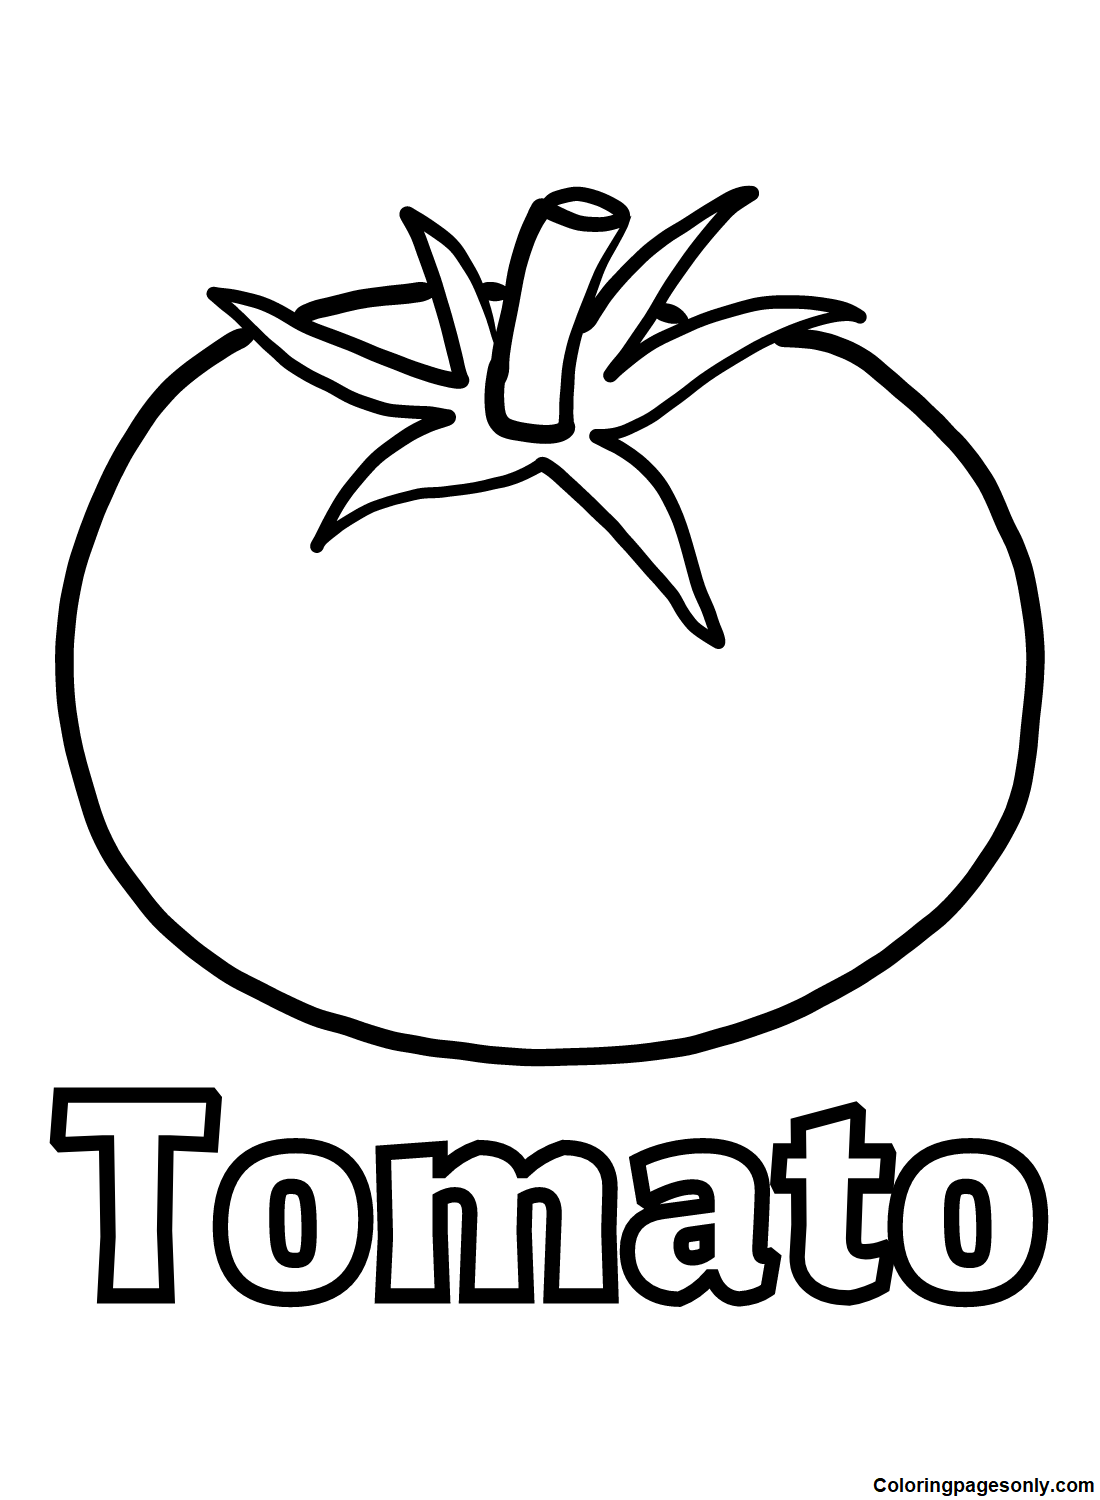 Free Tomato Images Coloring Page